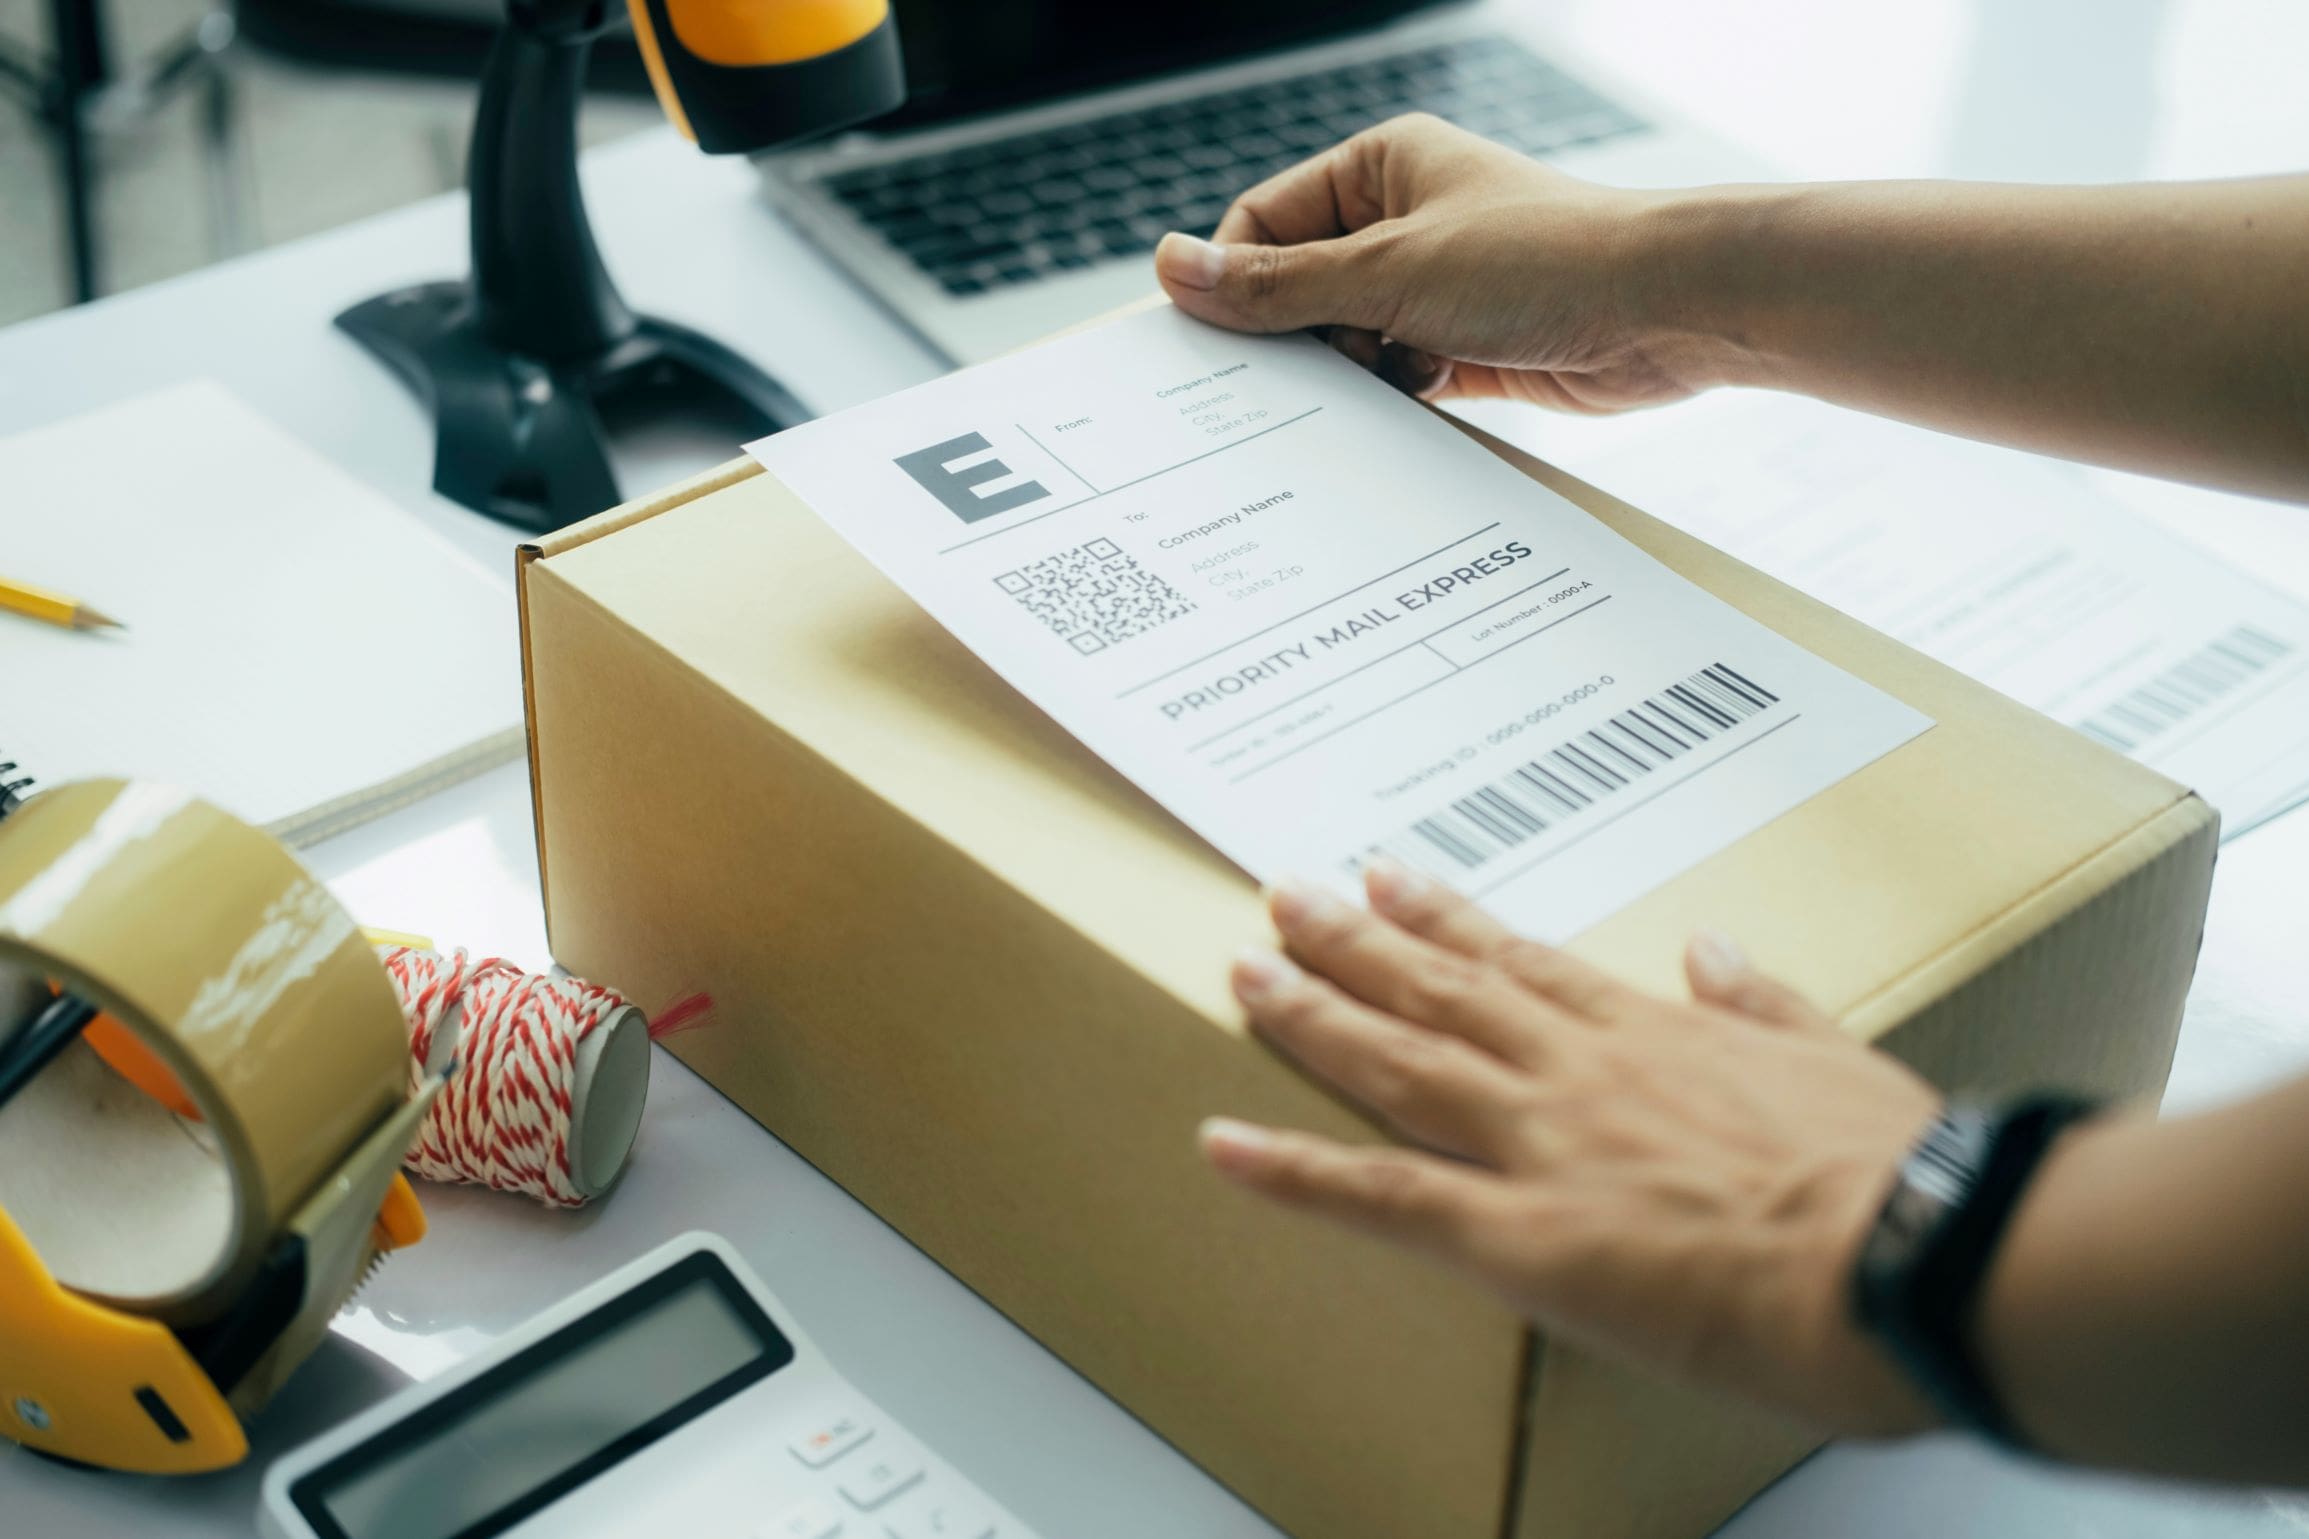 Optimize your shipping with Parcel Consulting's superior rates, innovative software, and expert advice. Boost efficiency and savings.